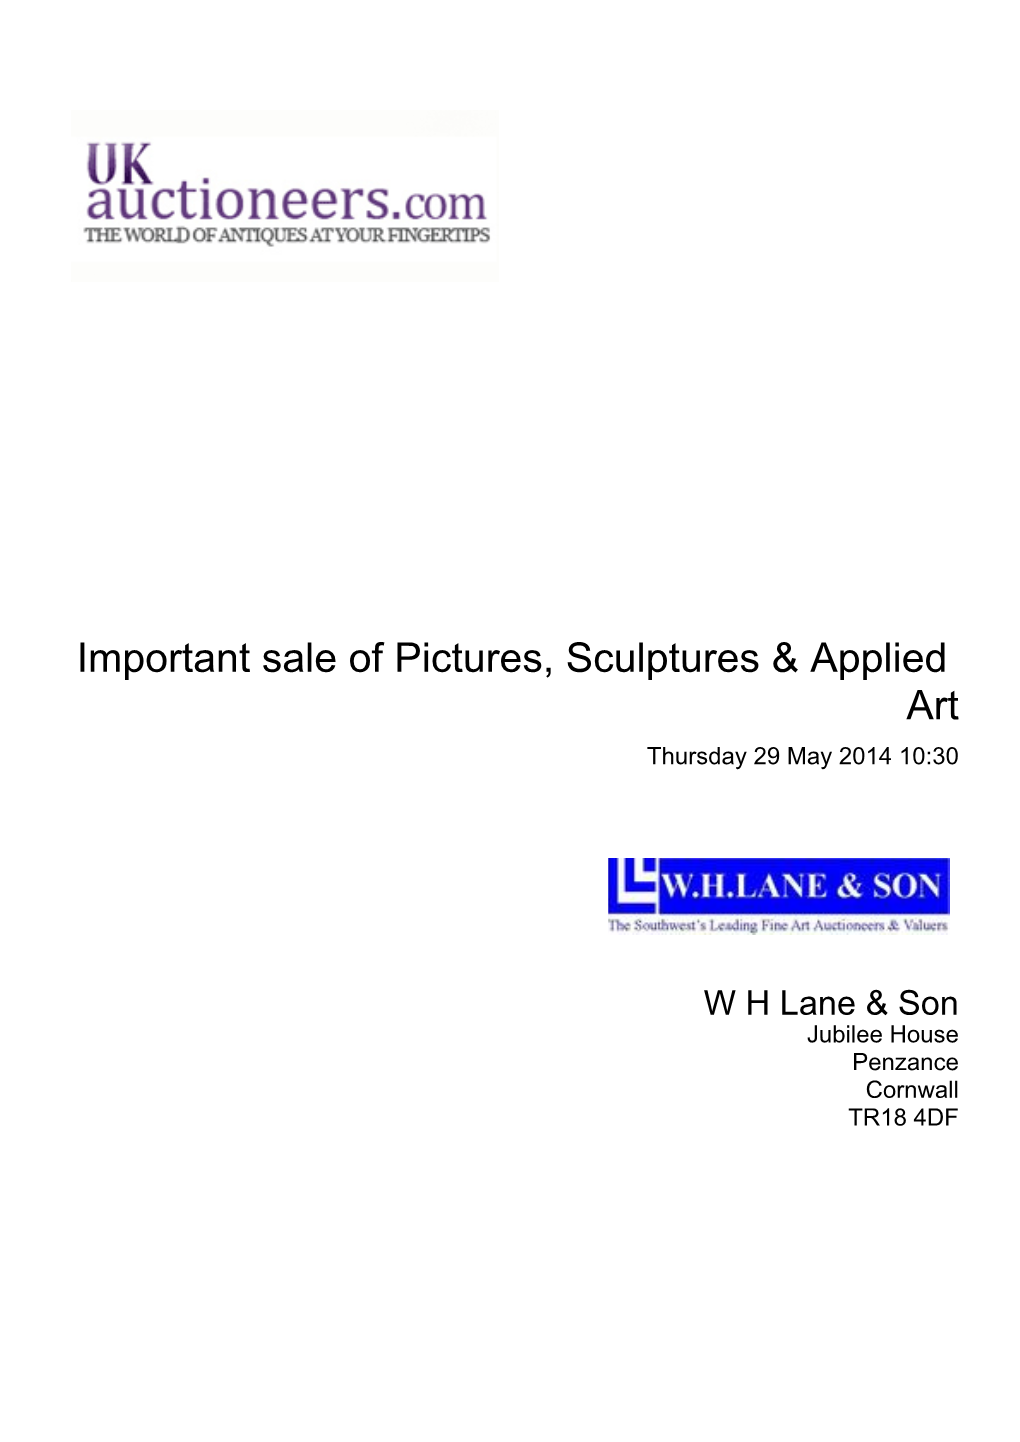 Important Sale of Pictures, Sculptures & Applied